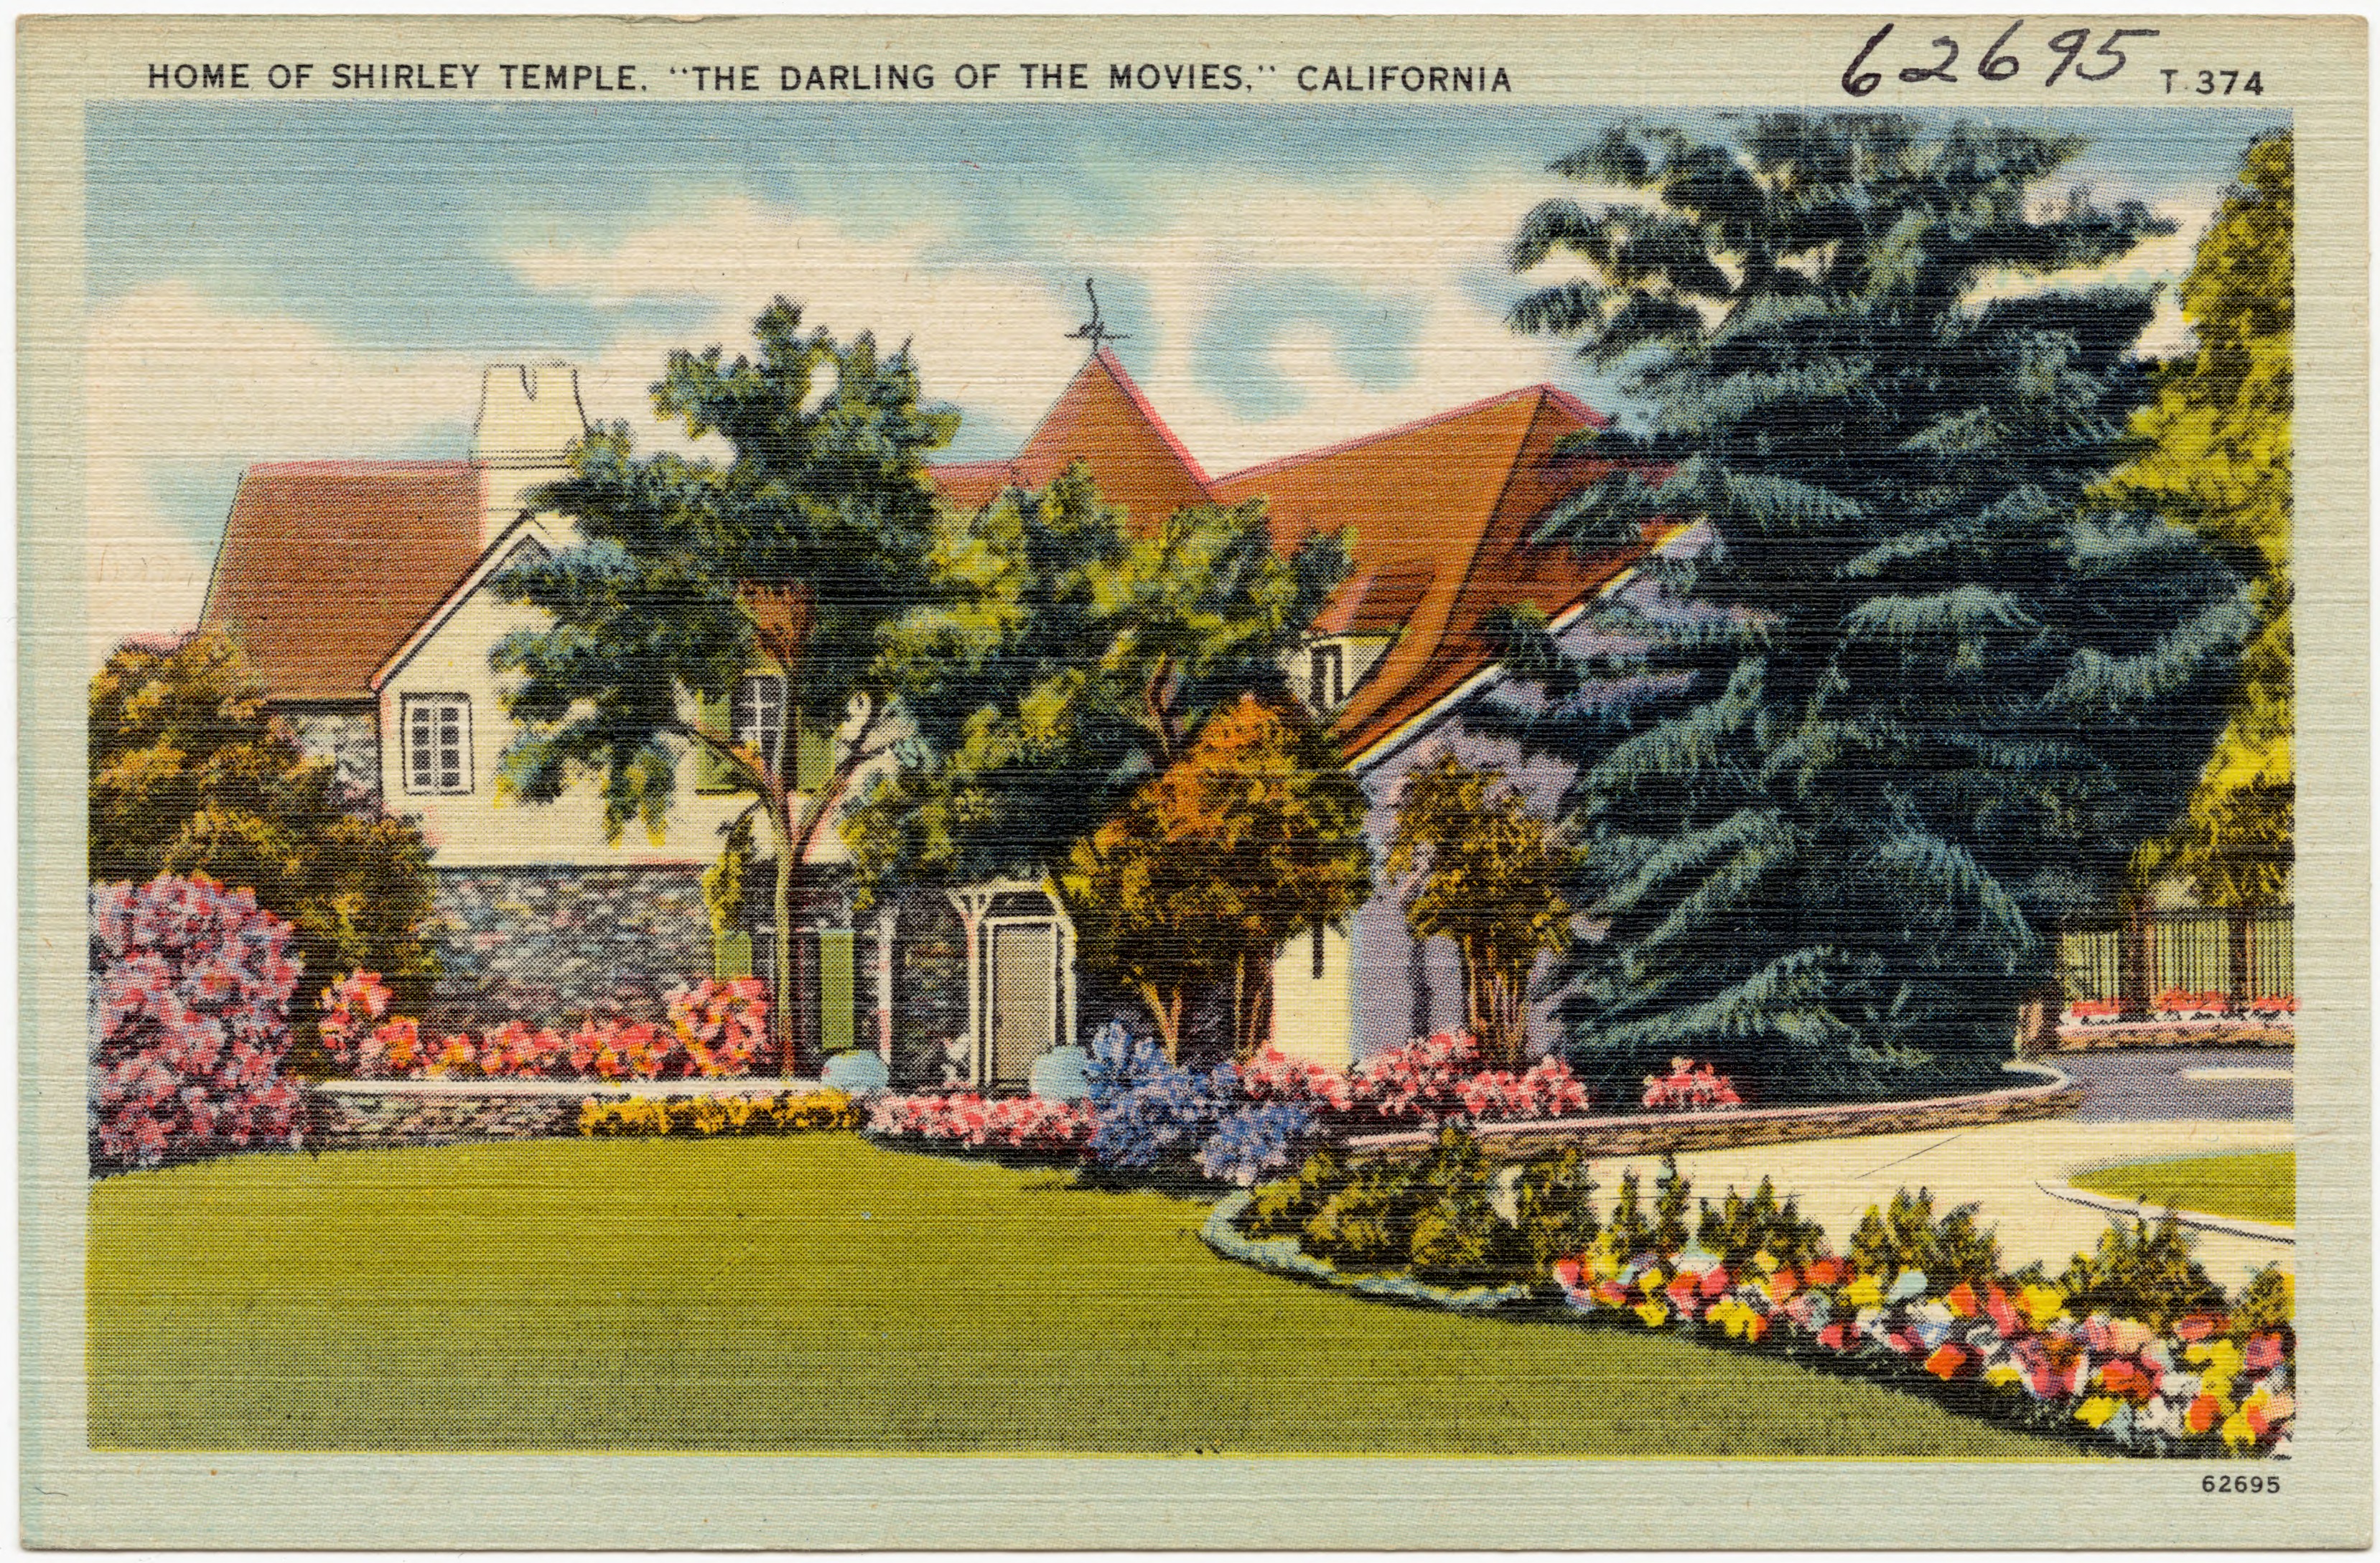 Wikipedia, California postcards by Tichnor Brothers, Houses in California, PD US no notice, Postcard